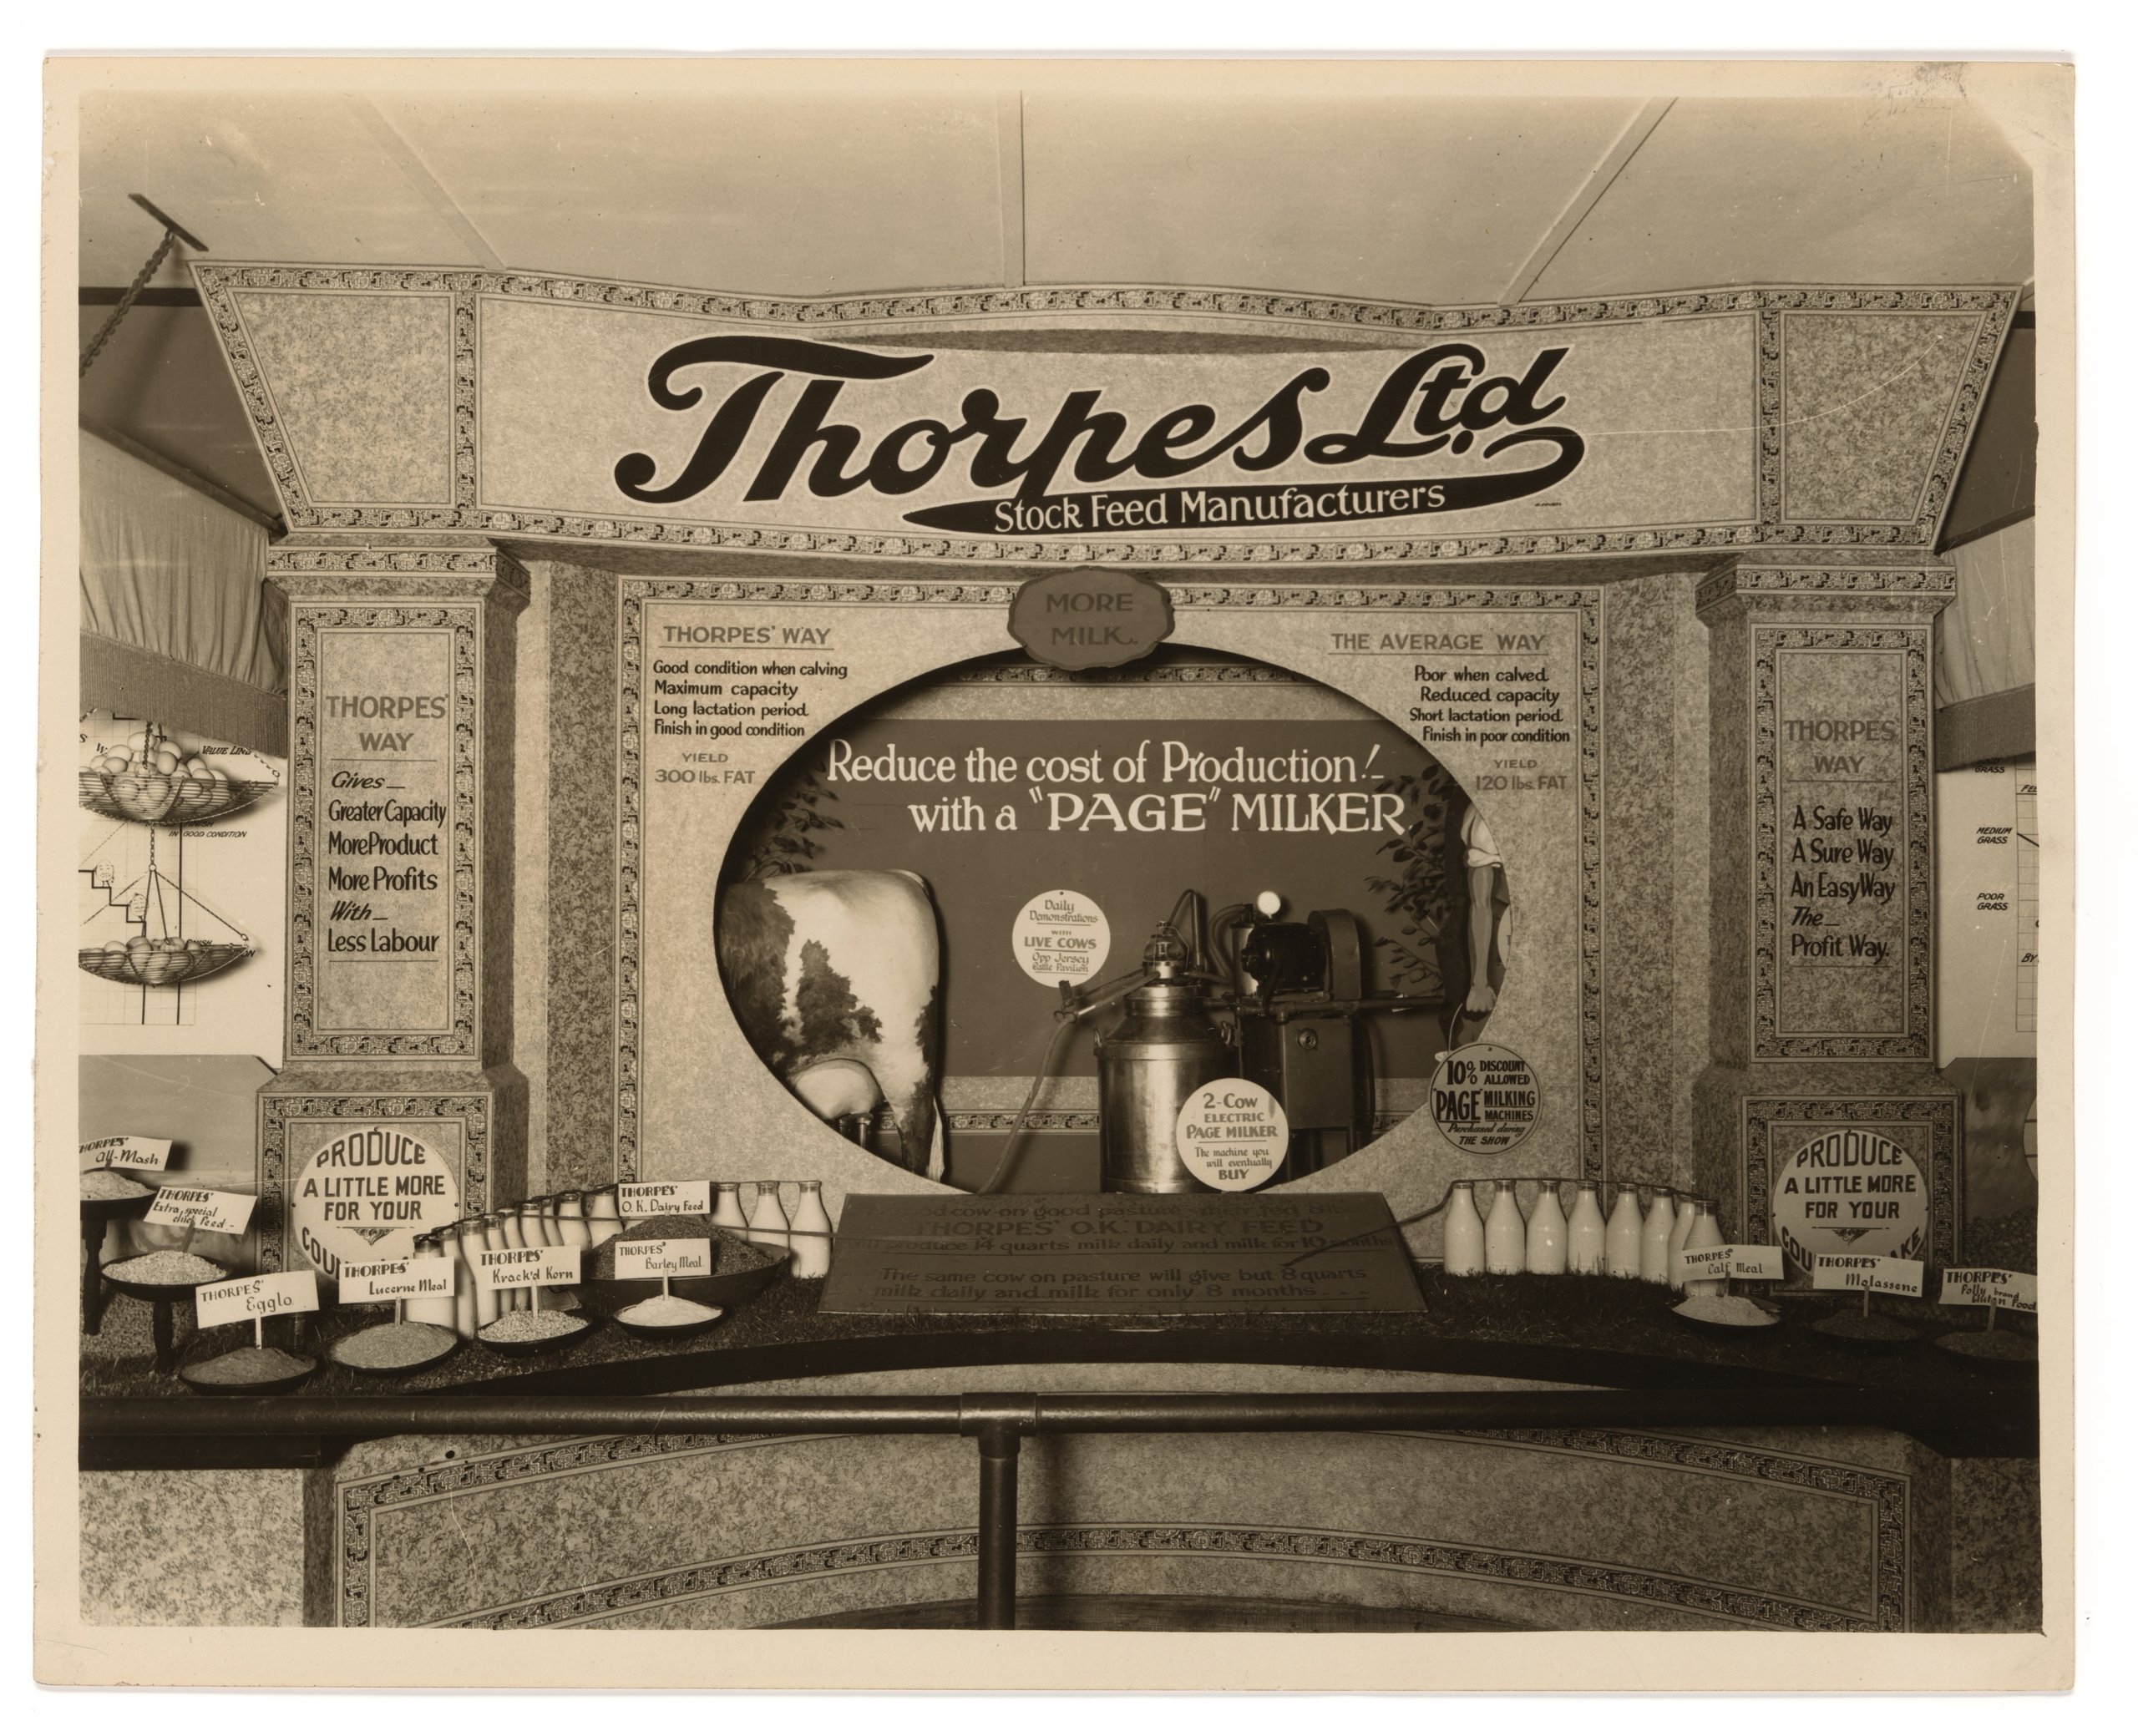 Photograph of promotional exhibit for Thorpes Ltd at Sydney Royal Easter Show